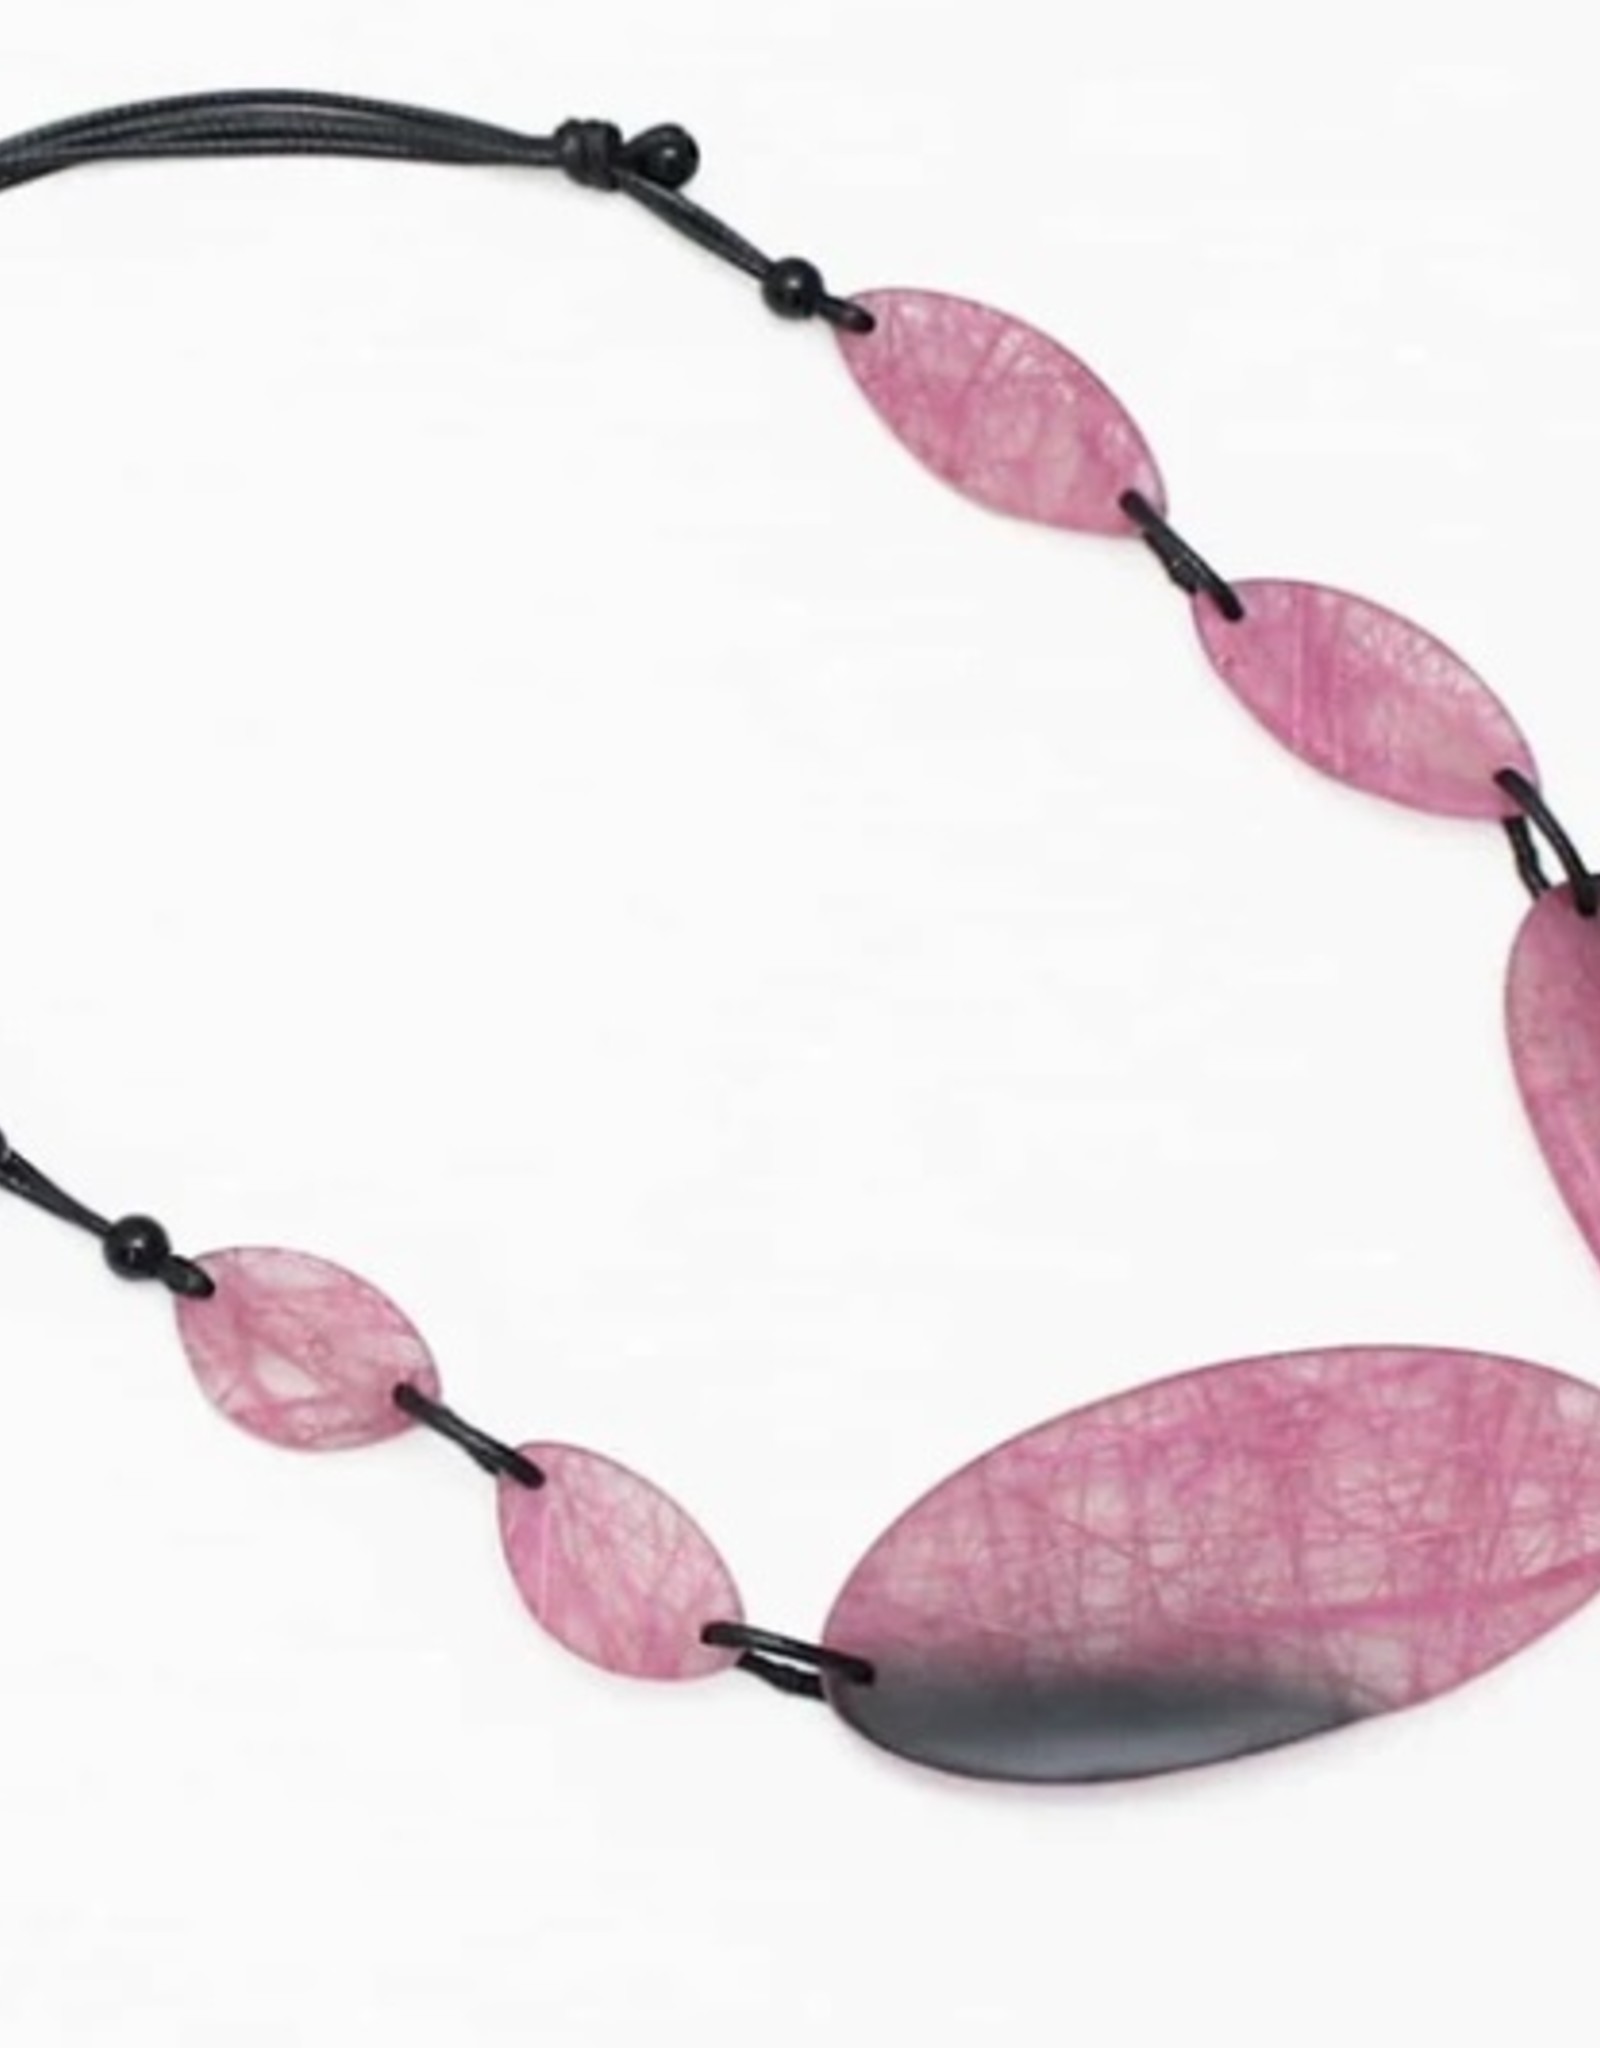 SYLCA Pink Frosted Wren Geo Statement Neck